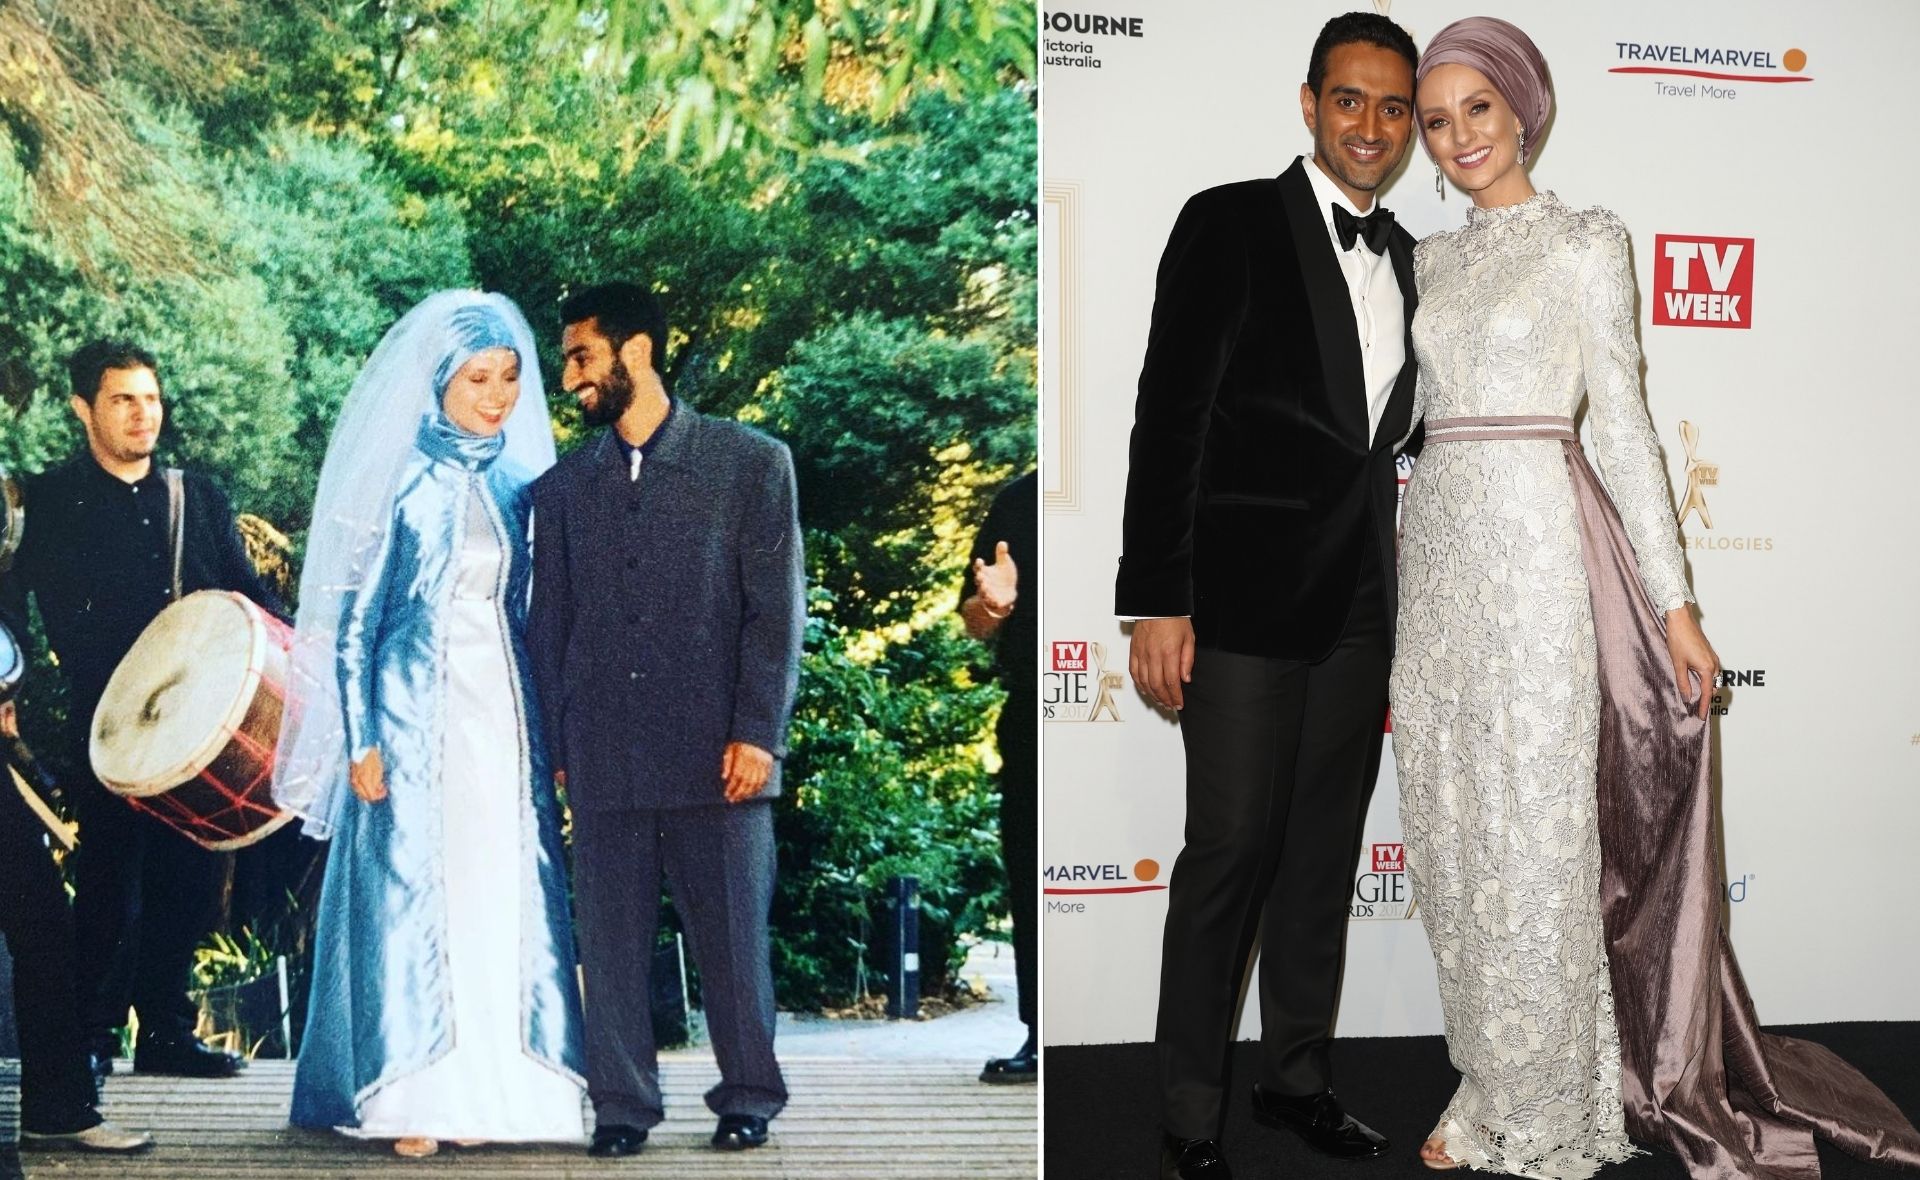 At 16, Waleed Aly’s wife Susan Carland told him, “I wouldn’t marry you if were the last person on earth,” and she’s been eating her words ever since